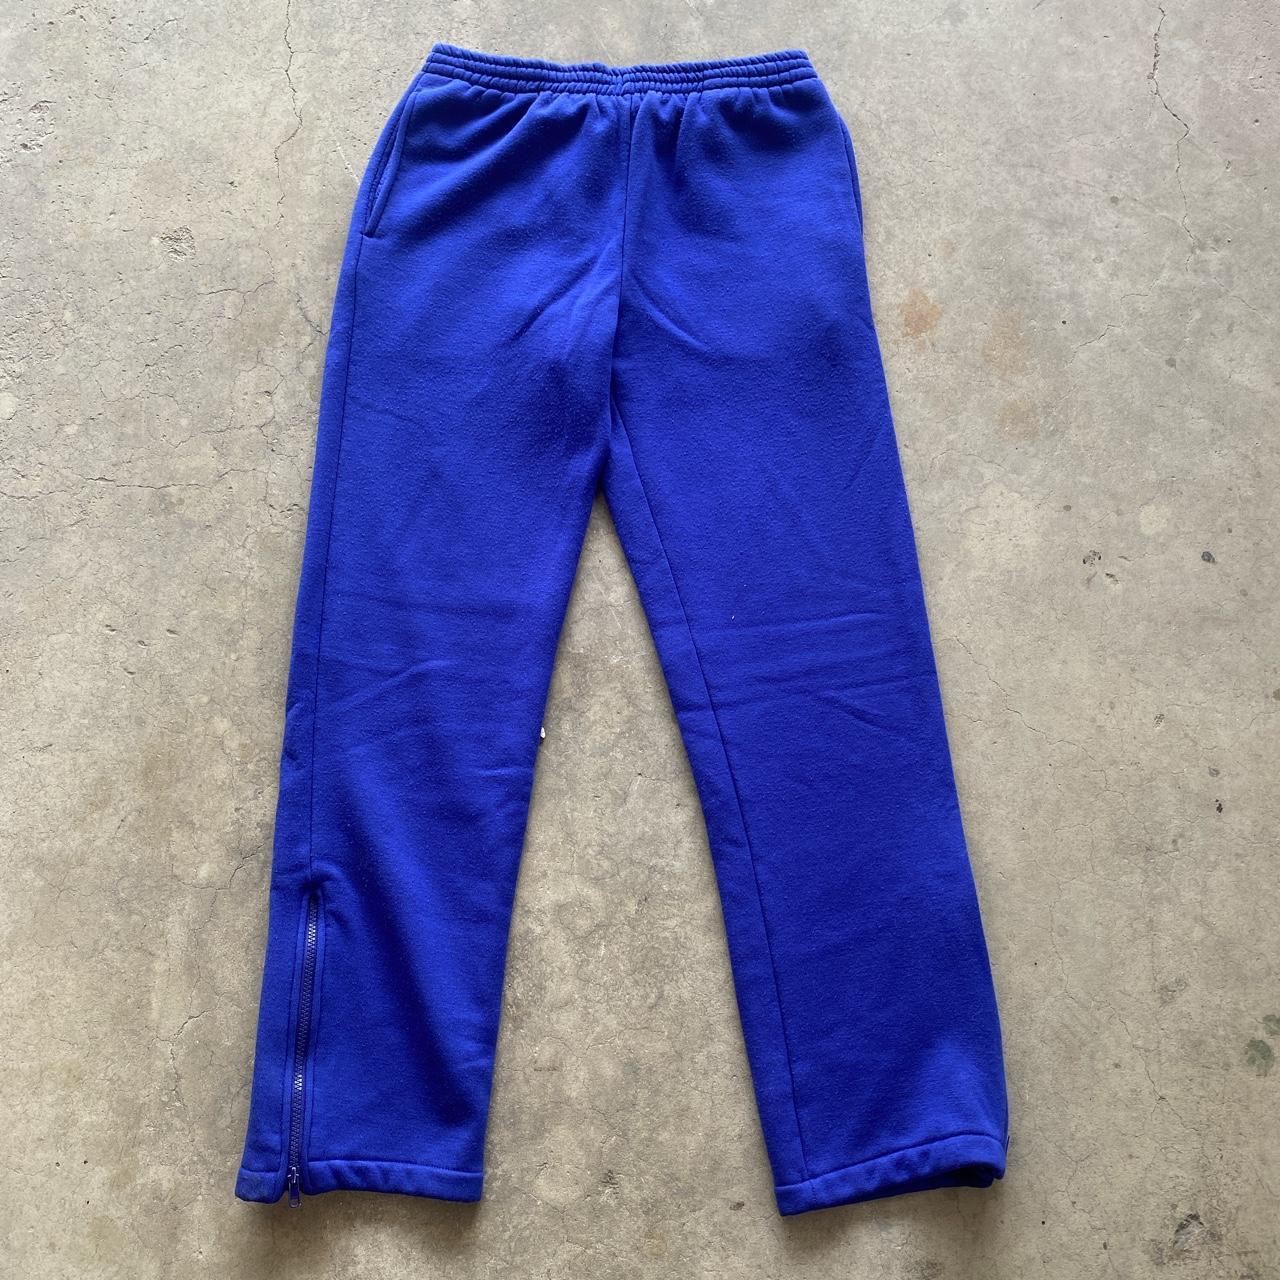 Blue The North Face Sweats Size M These are a... - Depop